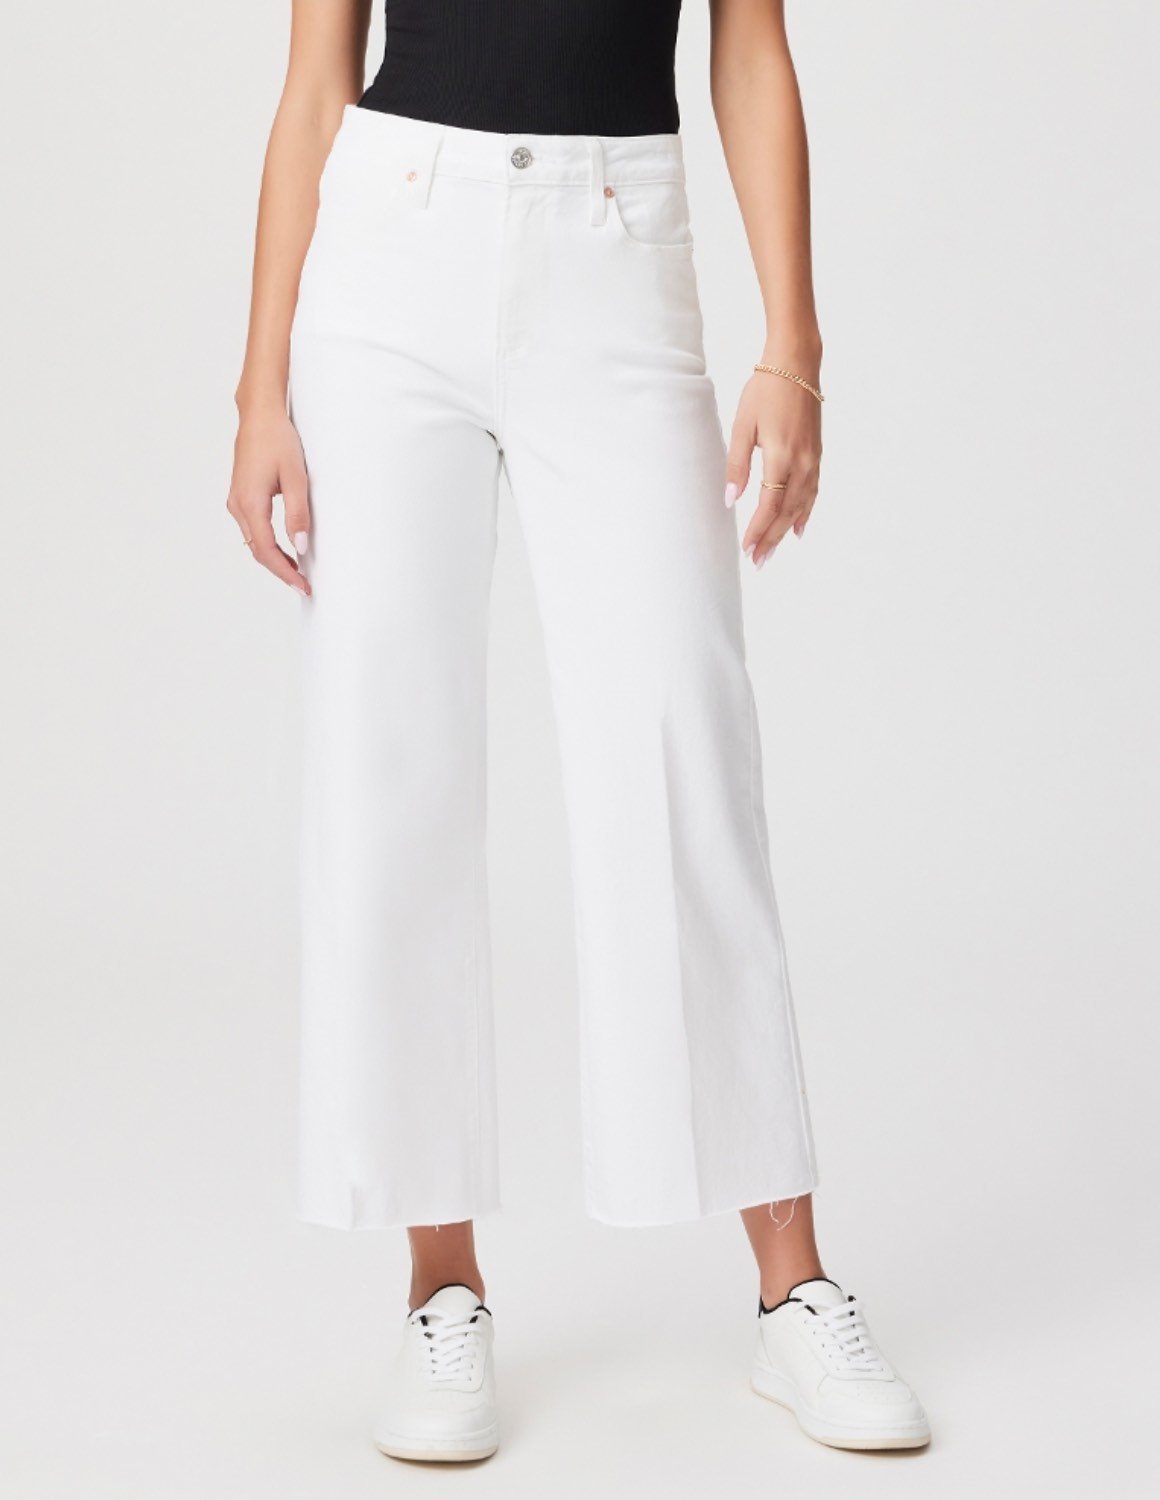 Anessa jeans in white by Paige jeans